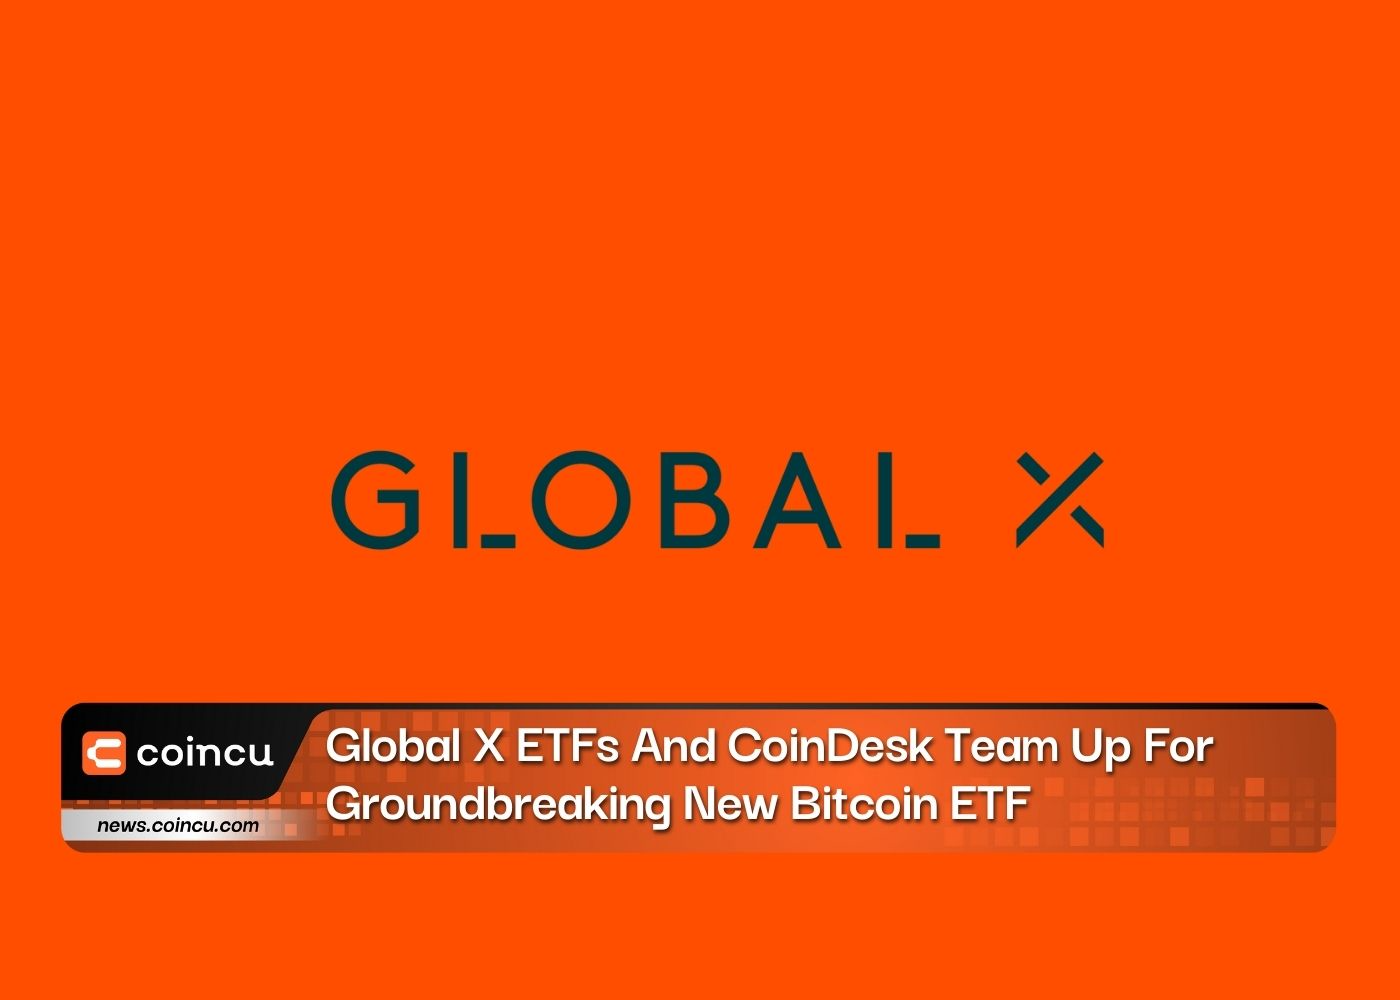 Global X ETFs And CoinDesk Team Up For Groundbreaking New Bitcoin ETF